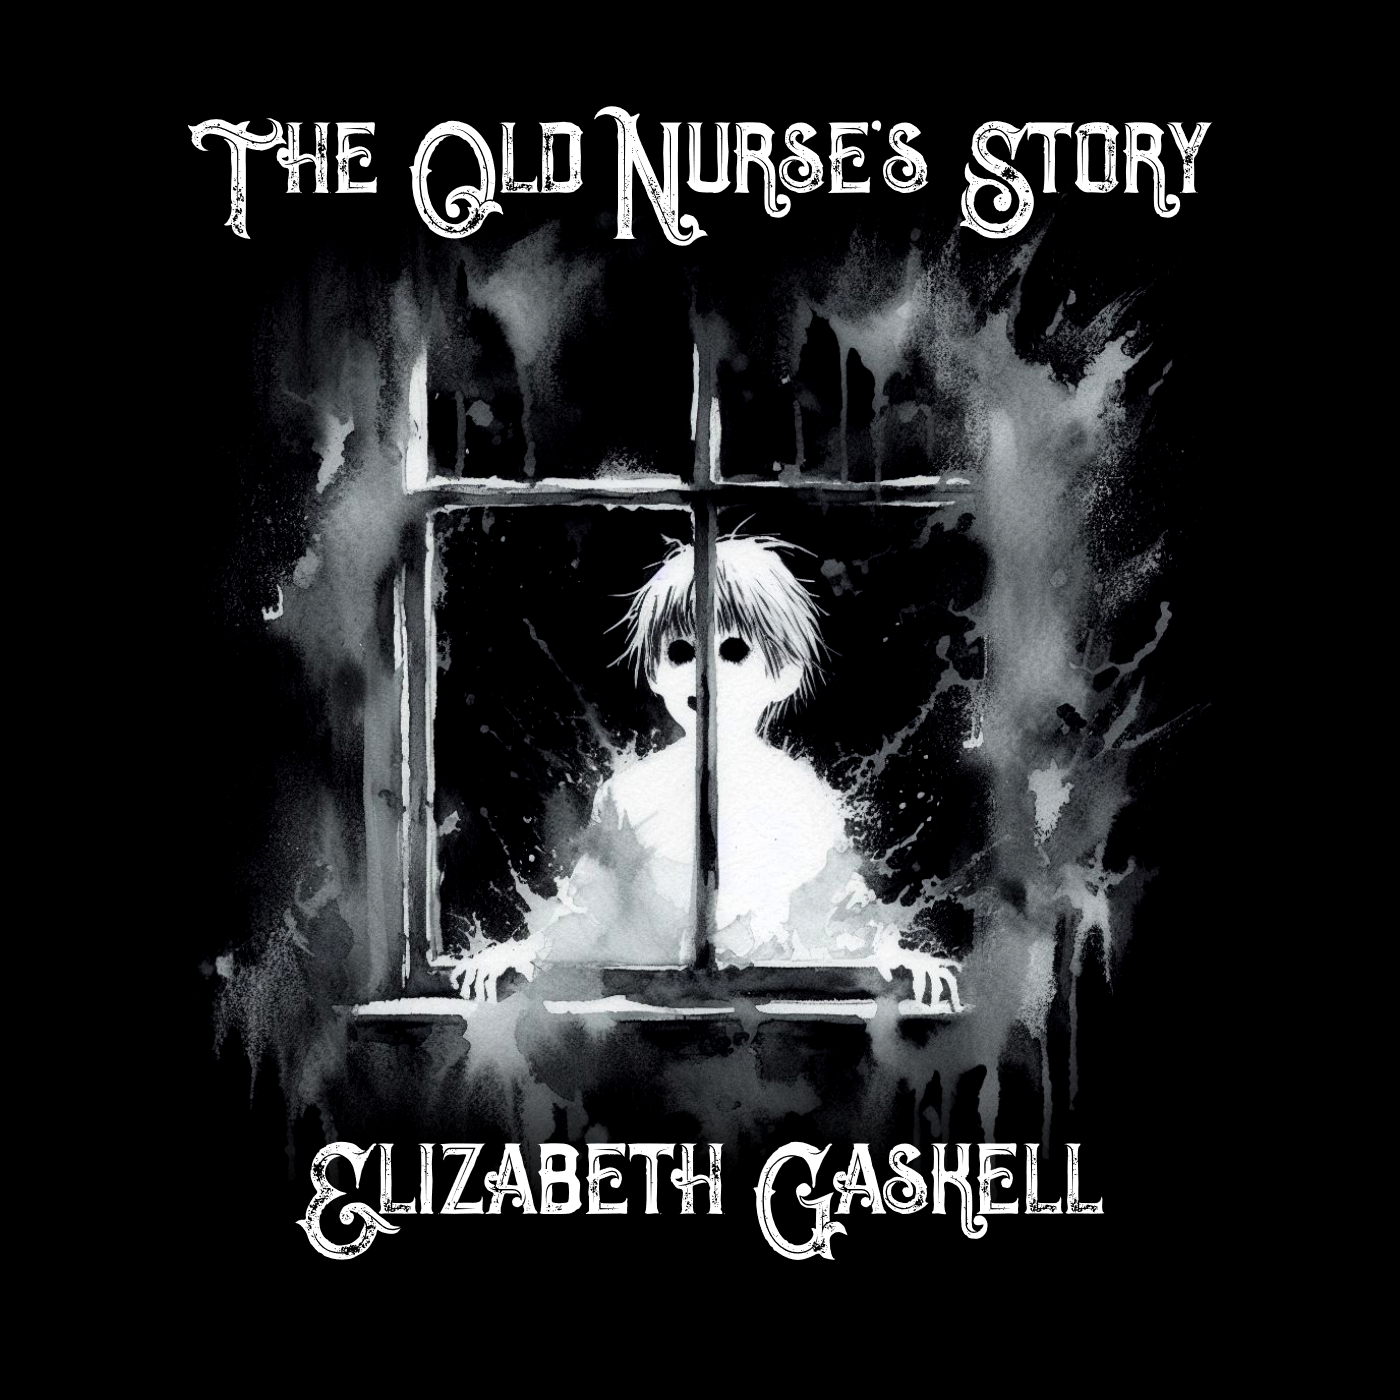 The Old Nurse's Story, by Elizabeth Gaskell